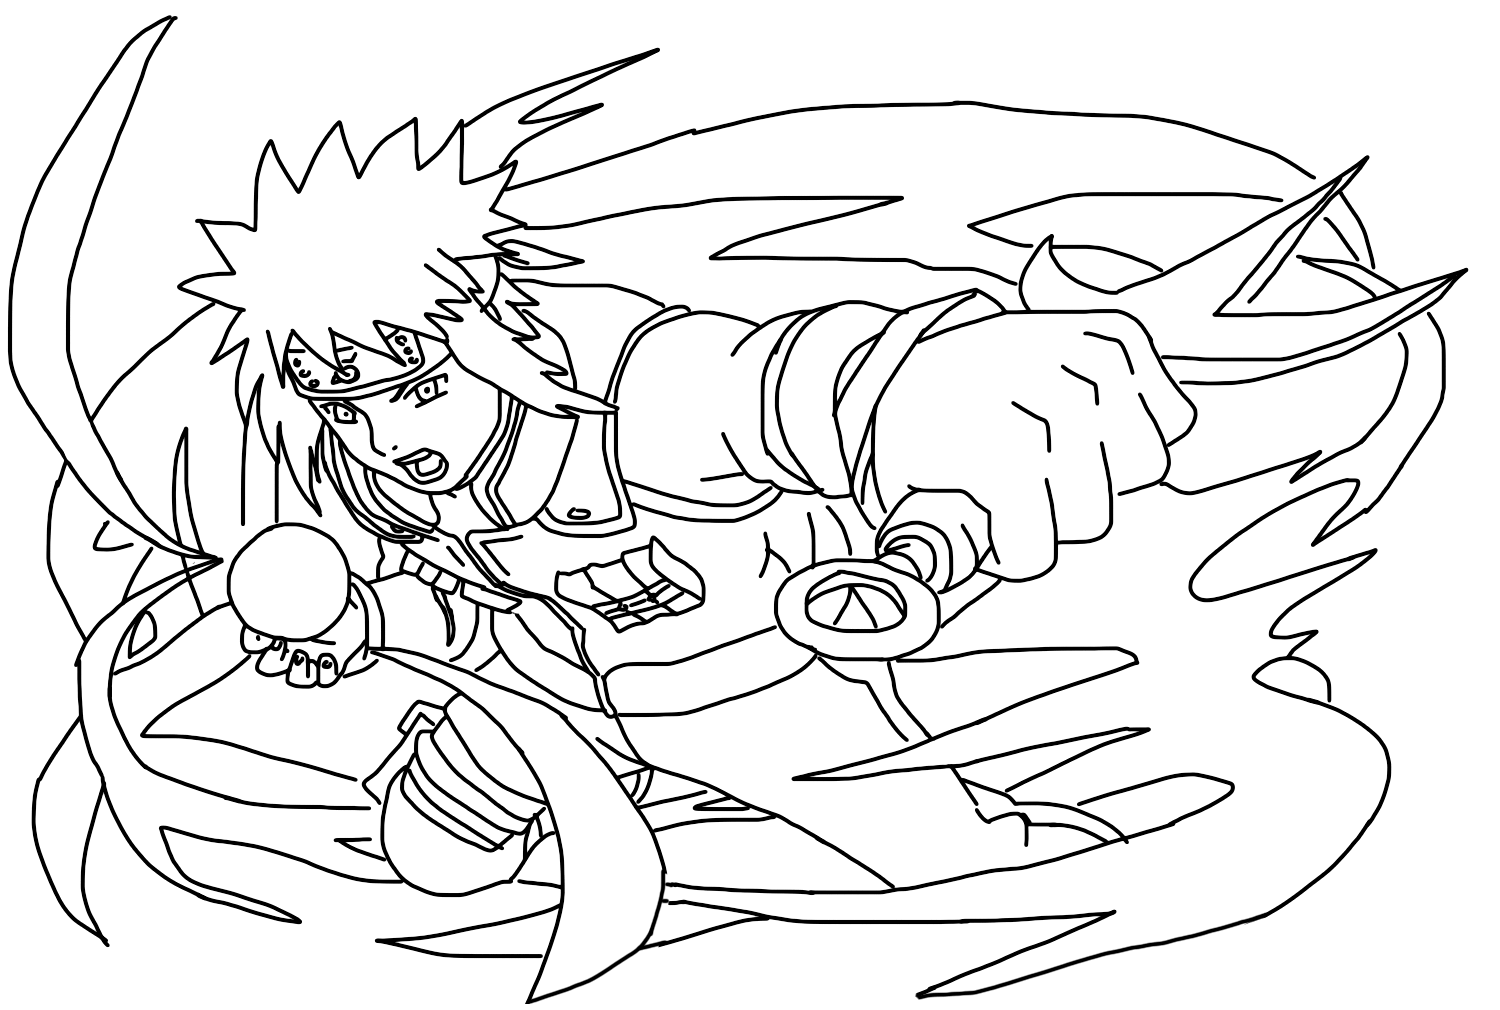 Minato Namikaze Coloring Page - Free Printable Coloring Pages